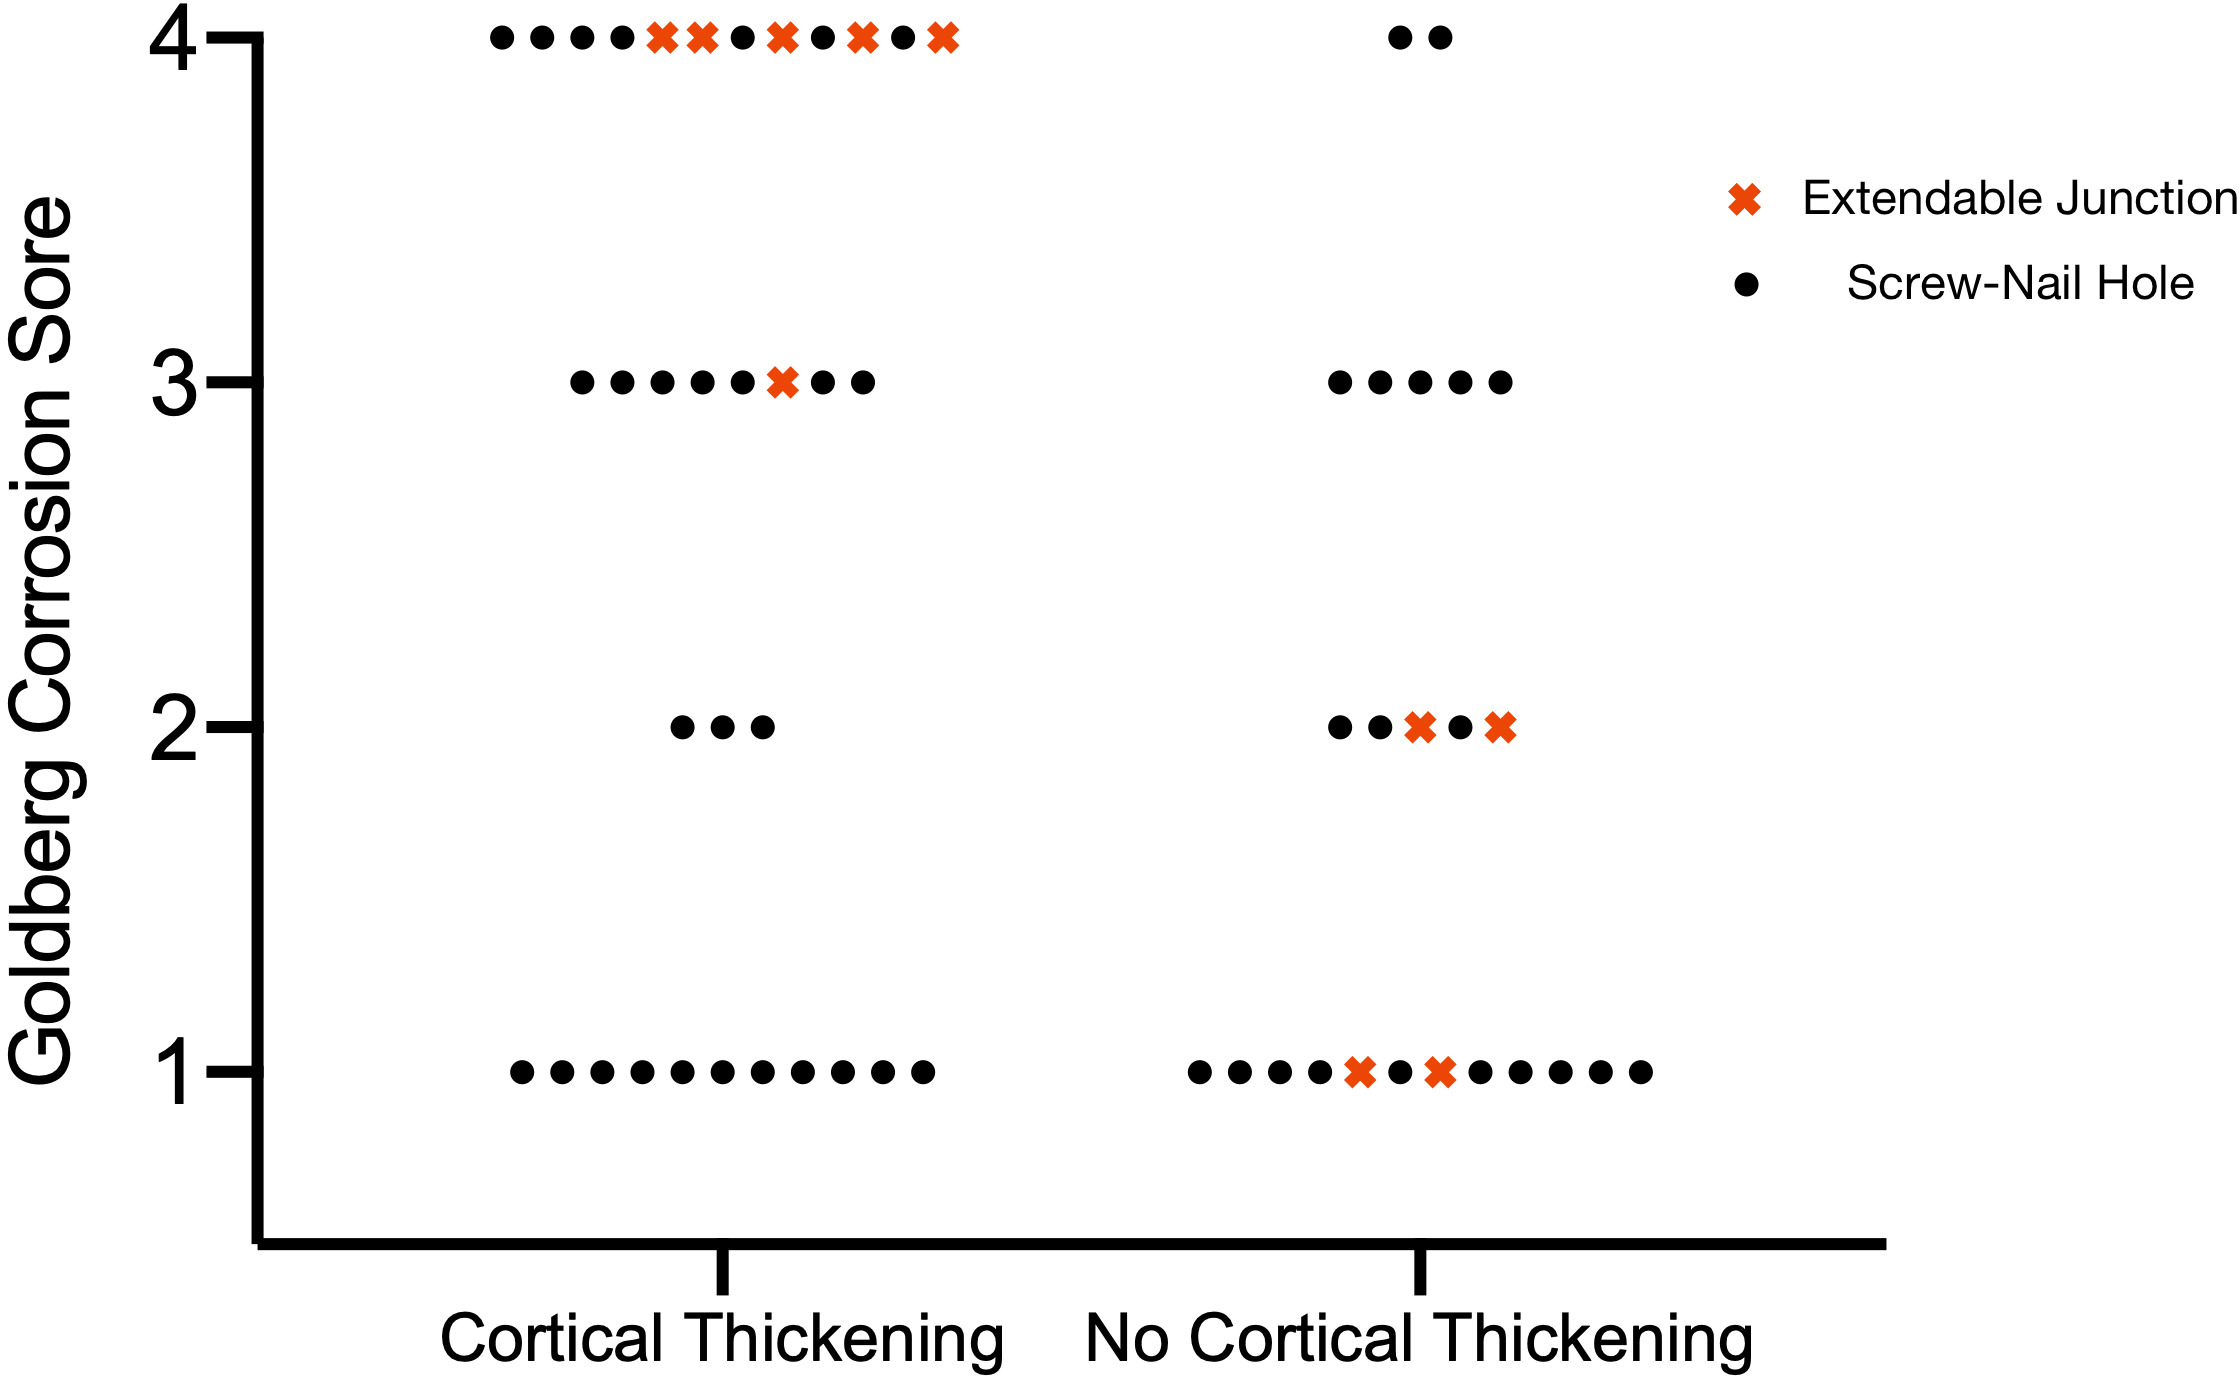 Fig. 12 
            Plot of all corrosion scores graded at the extendable junction of the nails and at each screw-nail hole. The scores have been separated between those in which unexpected cortical thickening was evident on plain radiograph imaging and those in which it was not present.
          